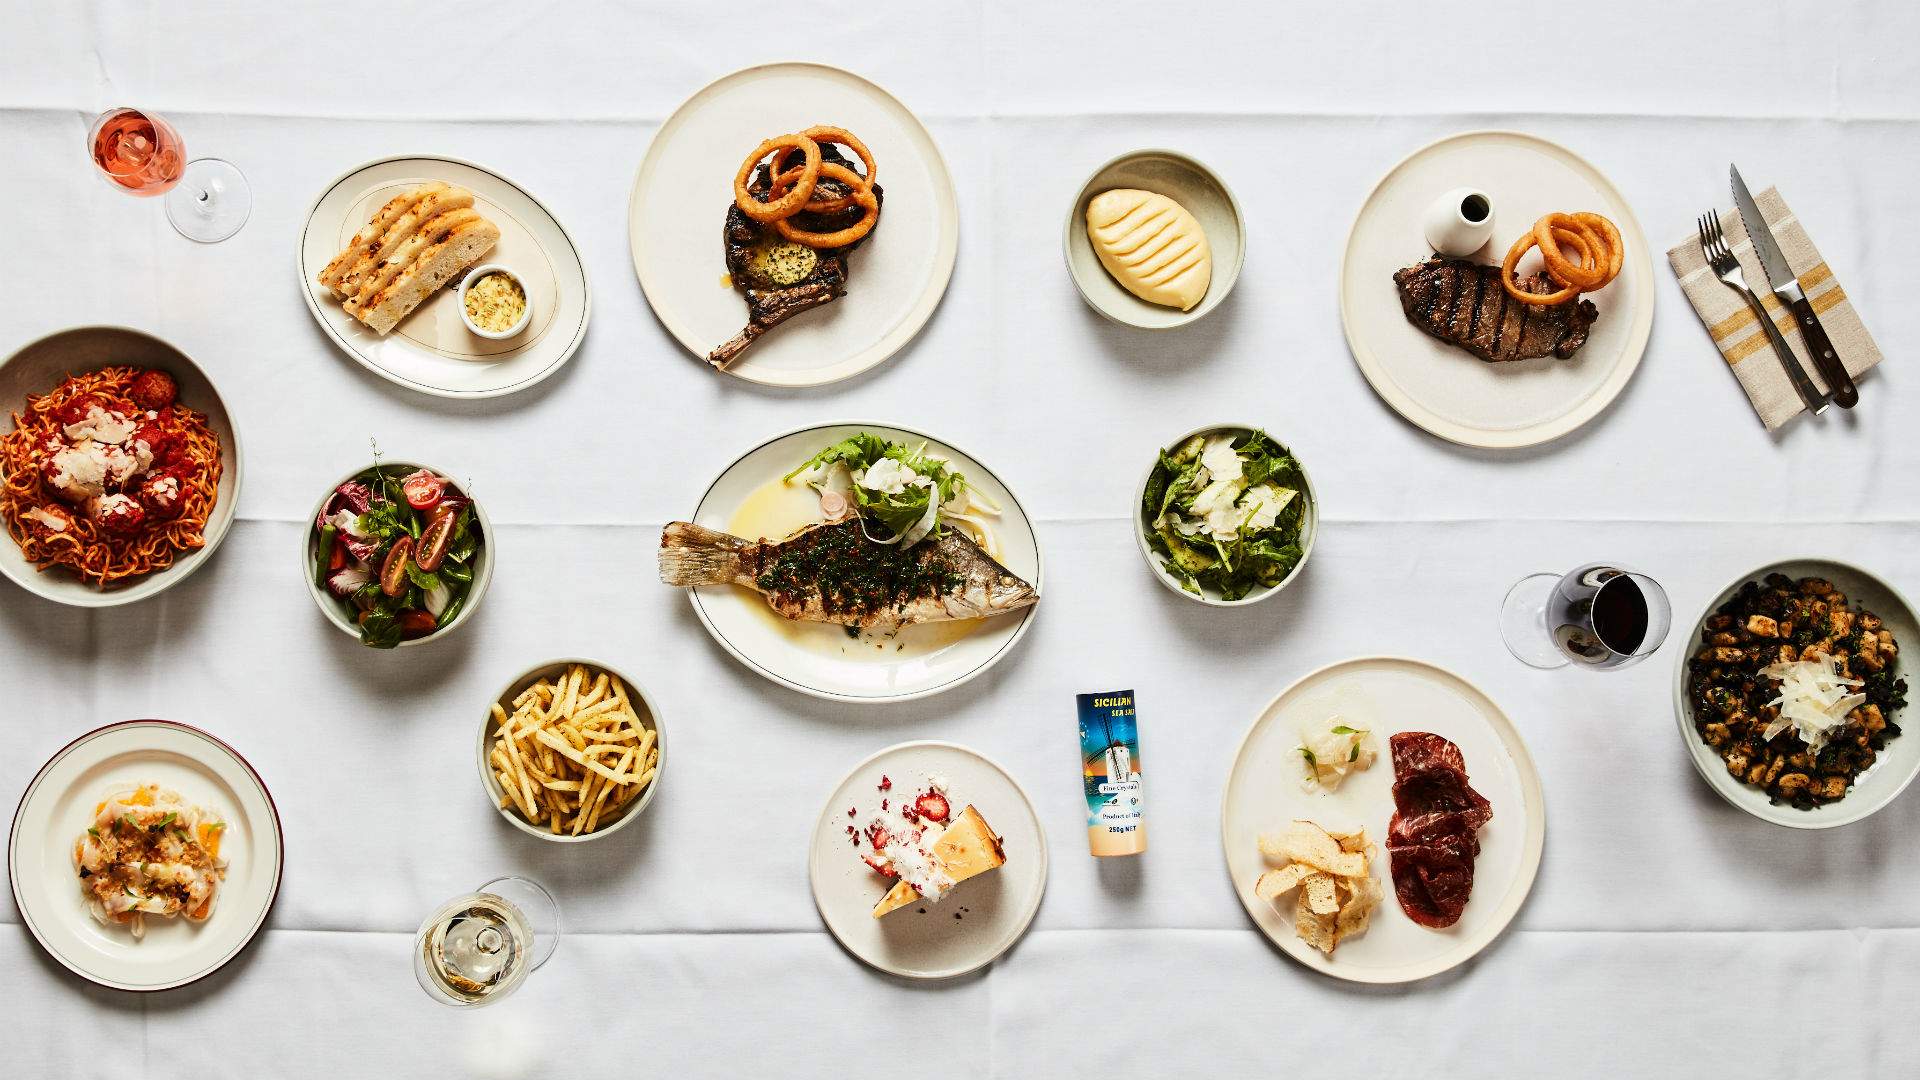 Pretty Boy Is Melbourne's New Steak and Pasta Joint Inspired by New York Steakhouses